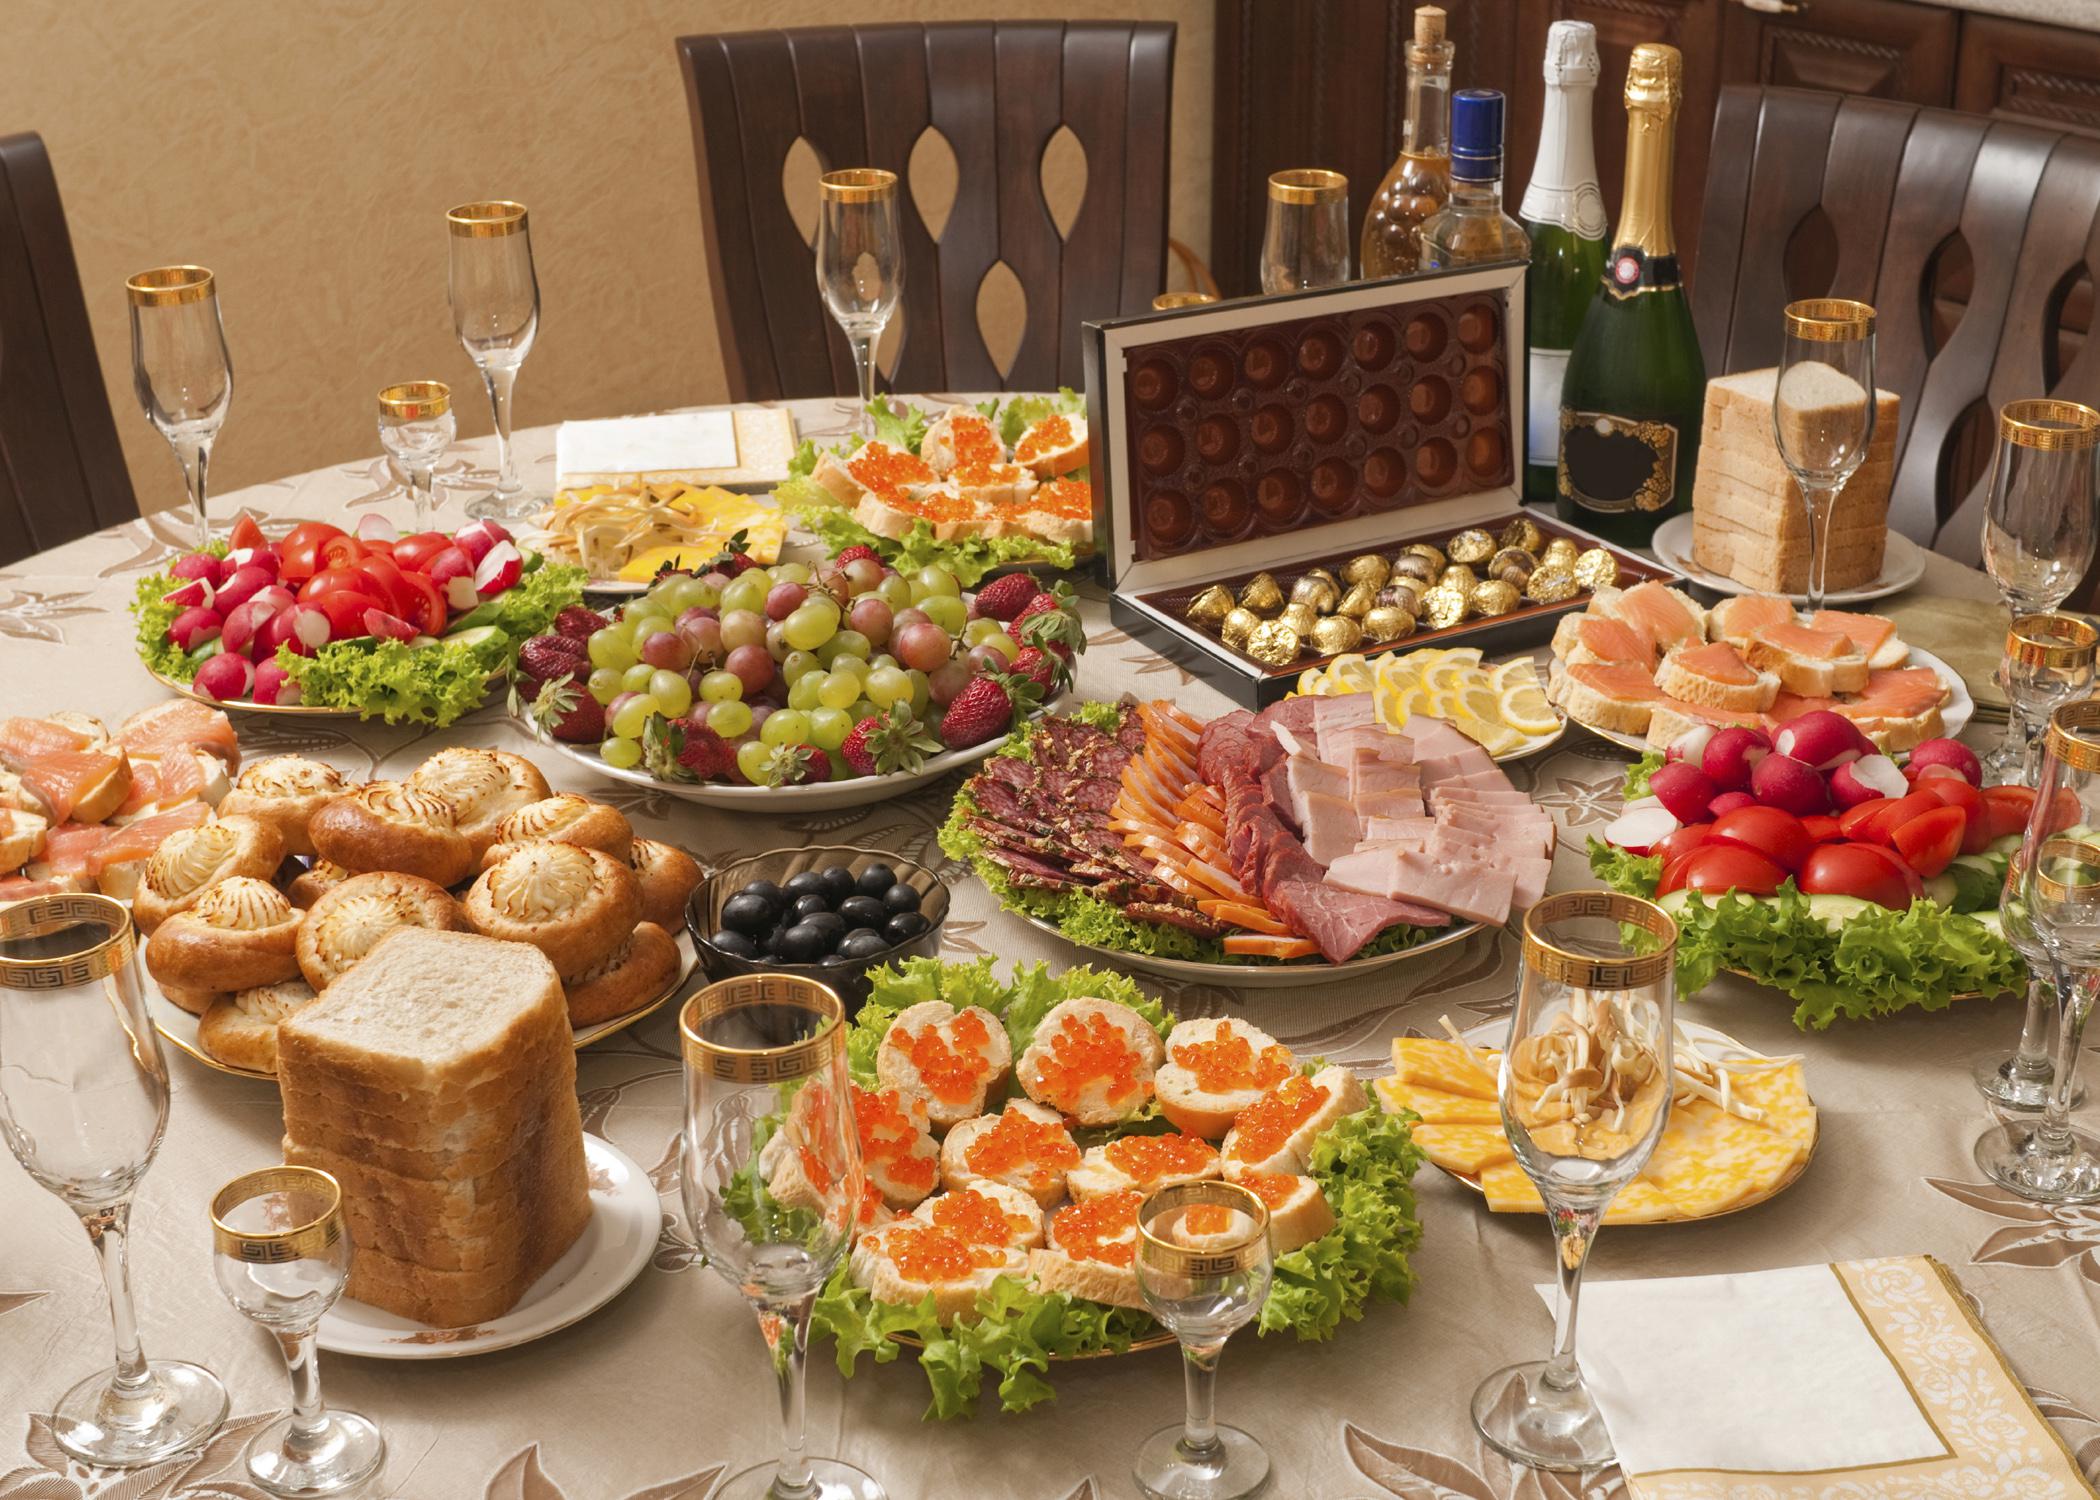 Appreciate holiday food displays, but do not get carried away with unhealthy options, including the beverage choices. (Photo by Getty Images/iStockphoto)